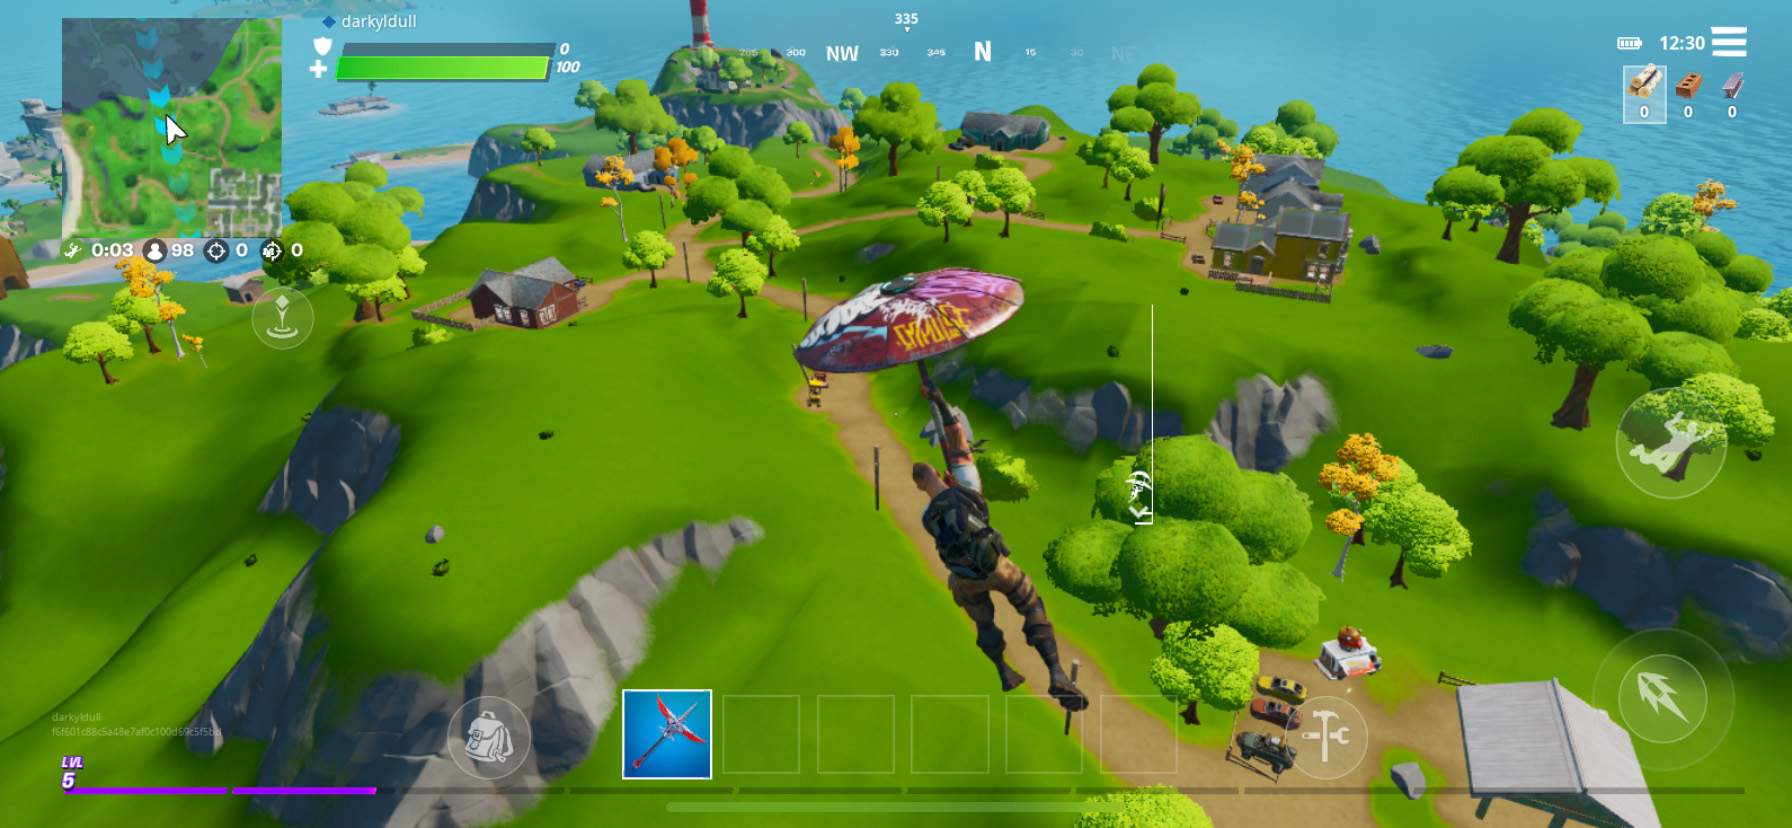 Fortnite Mobile for Android Tips and Tricks for Staying Alive and